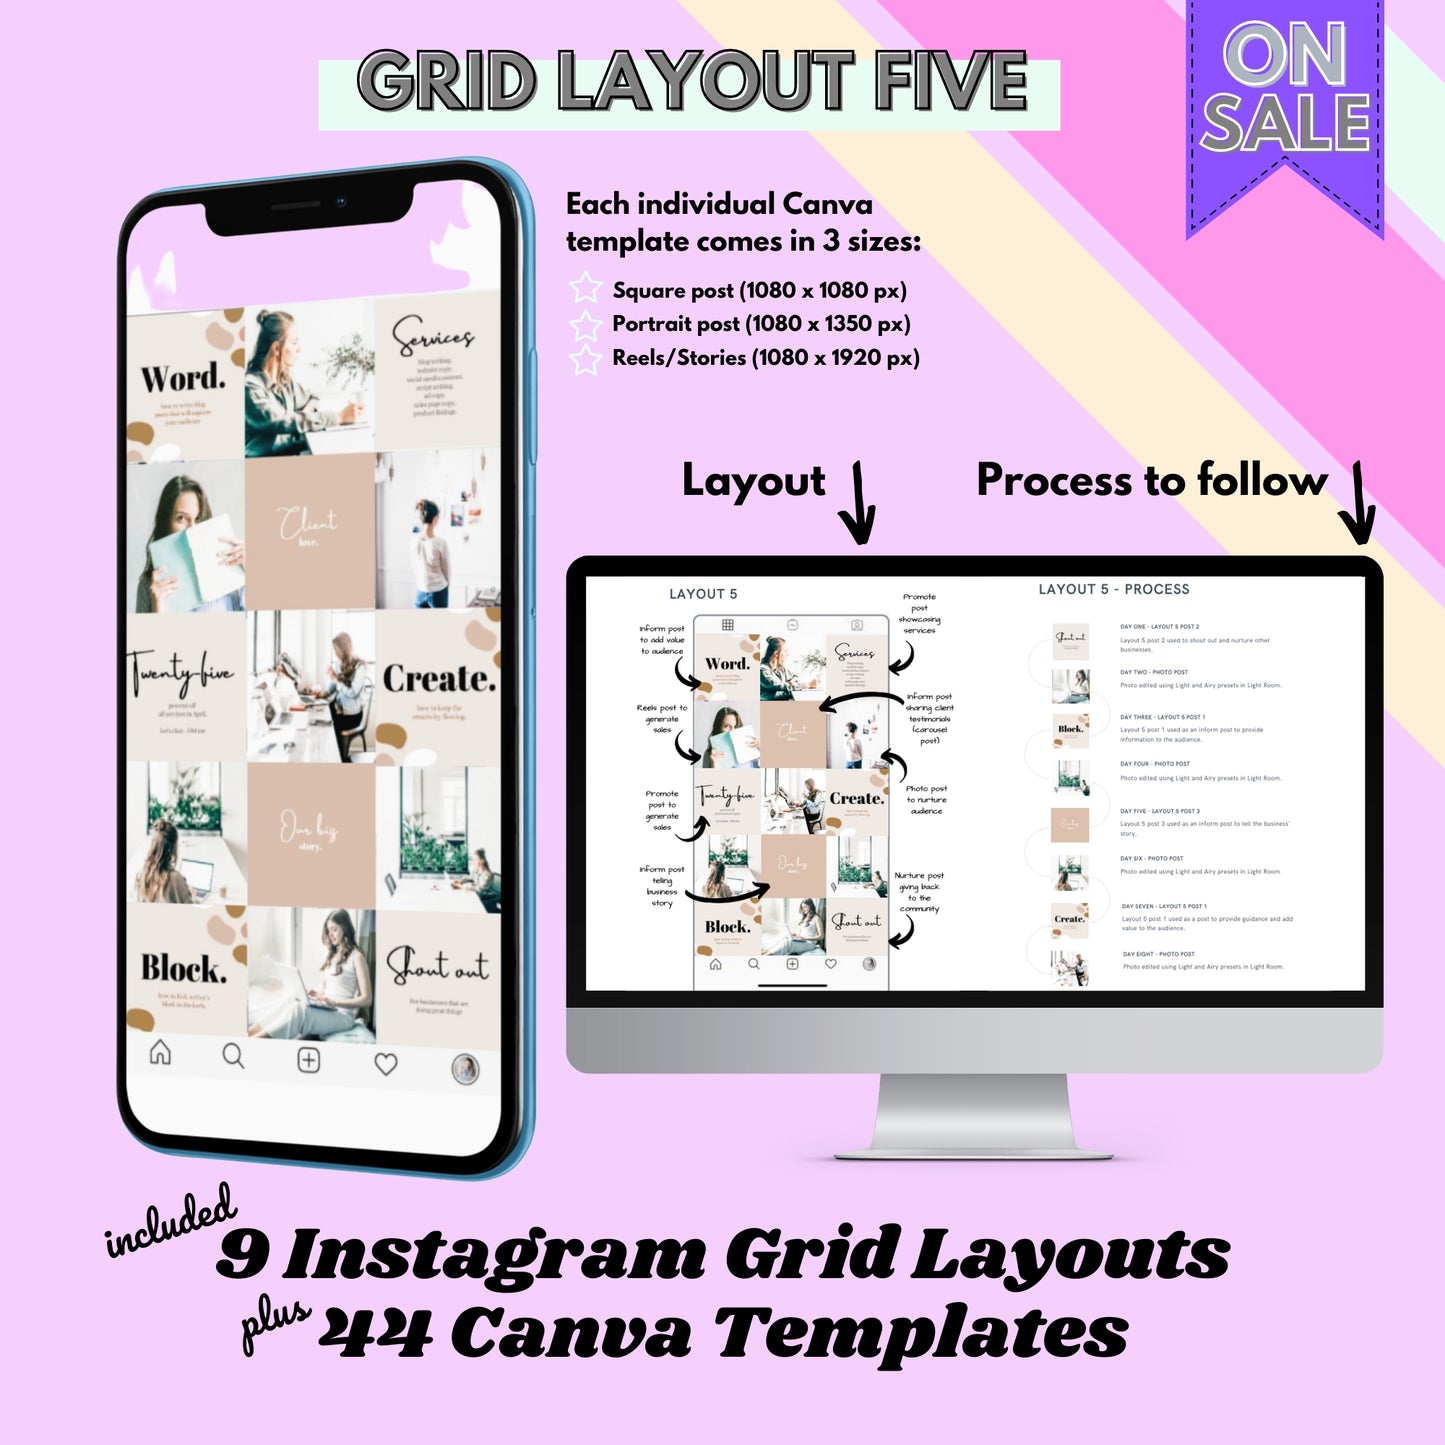 Instagram Grid Layout Guide - Instant download